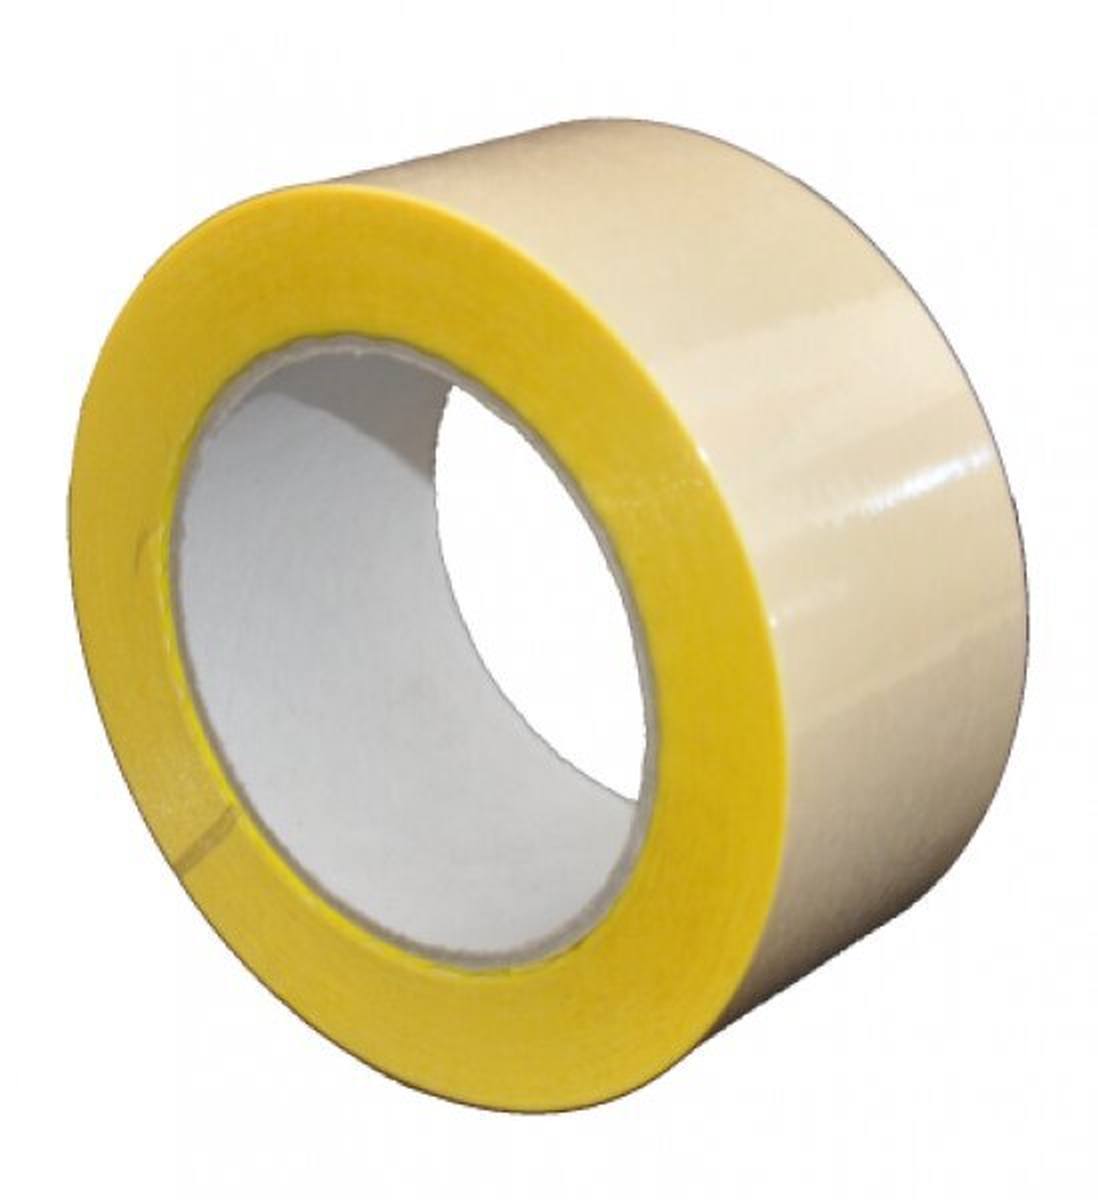 S-K-S 407 Double-sided adhesive tape with polypropylene backing, high / low tack, yellow, 300 mm x 50 m, 0.15 mm